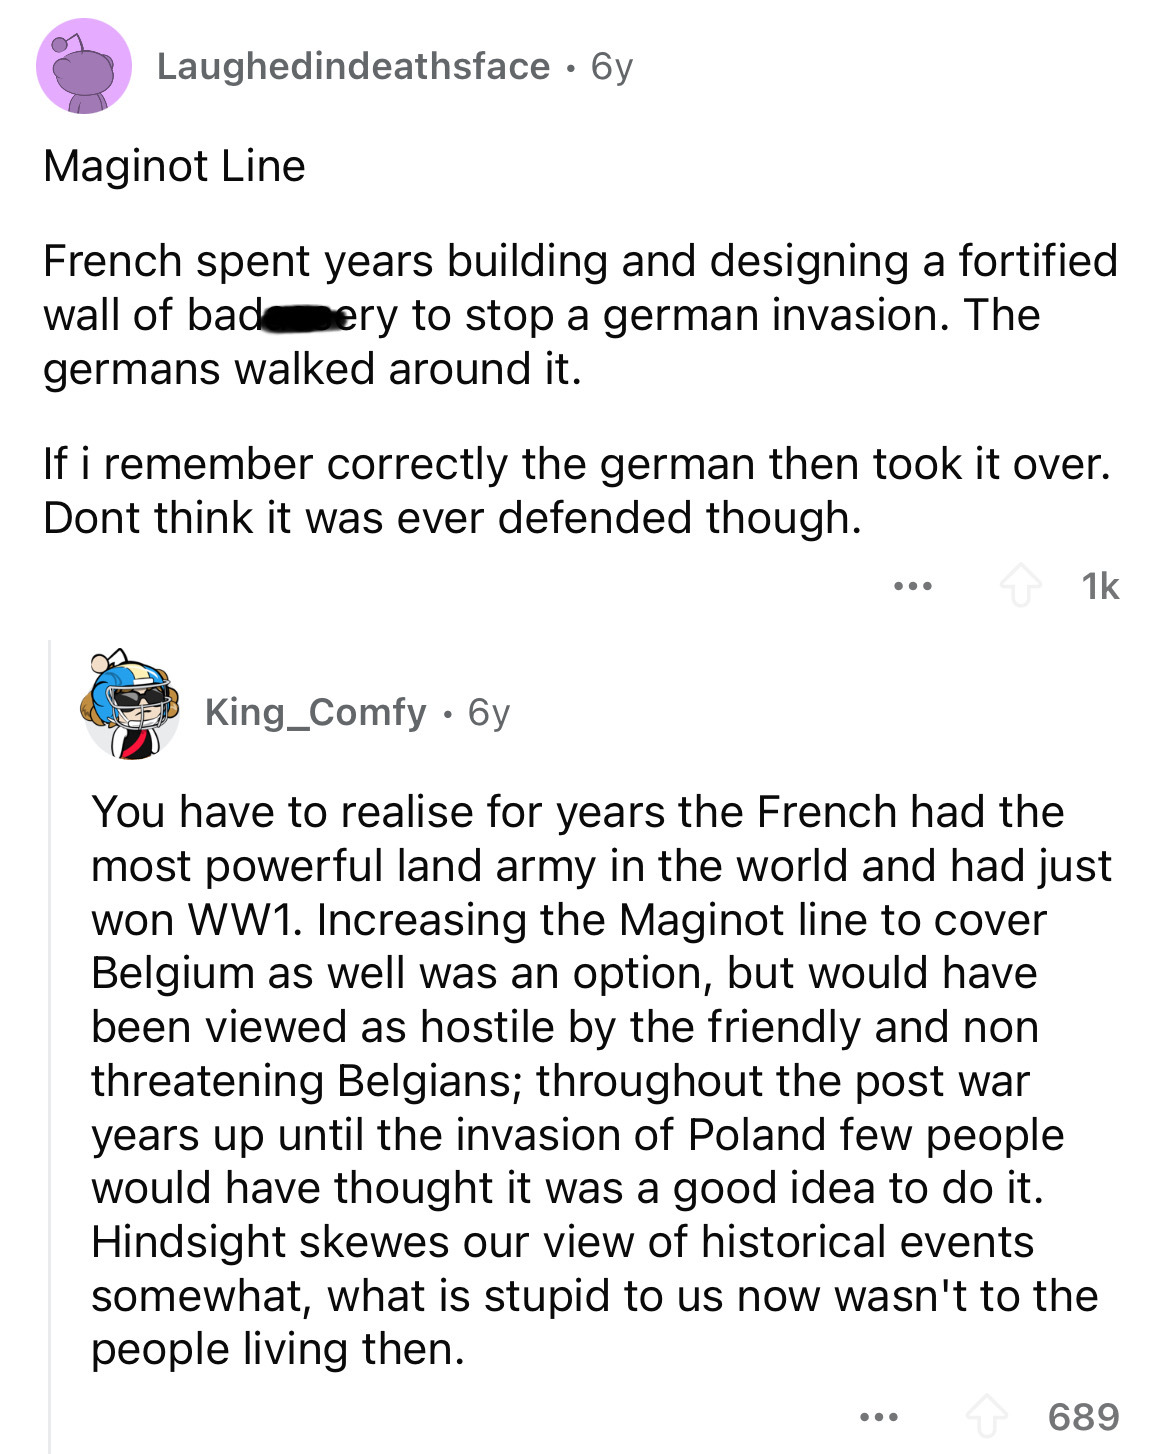 document - Laughedindeathsface 6y Maginot Line French spent years building and designing a fortified wall of bad ery to stop a german invasion. The germans walked around it. If i remember correctly the german then took it over. Dont think it was ever defe